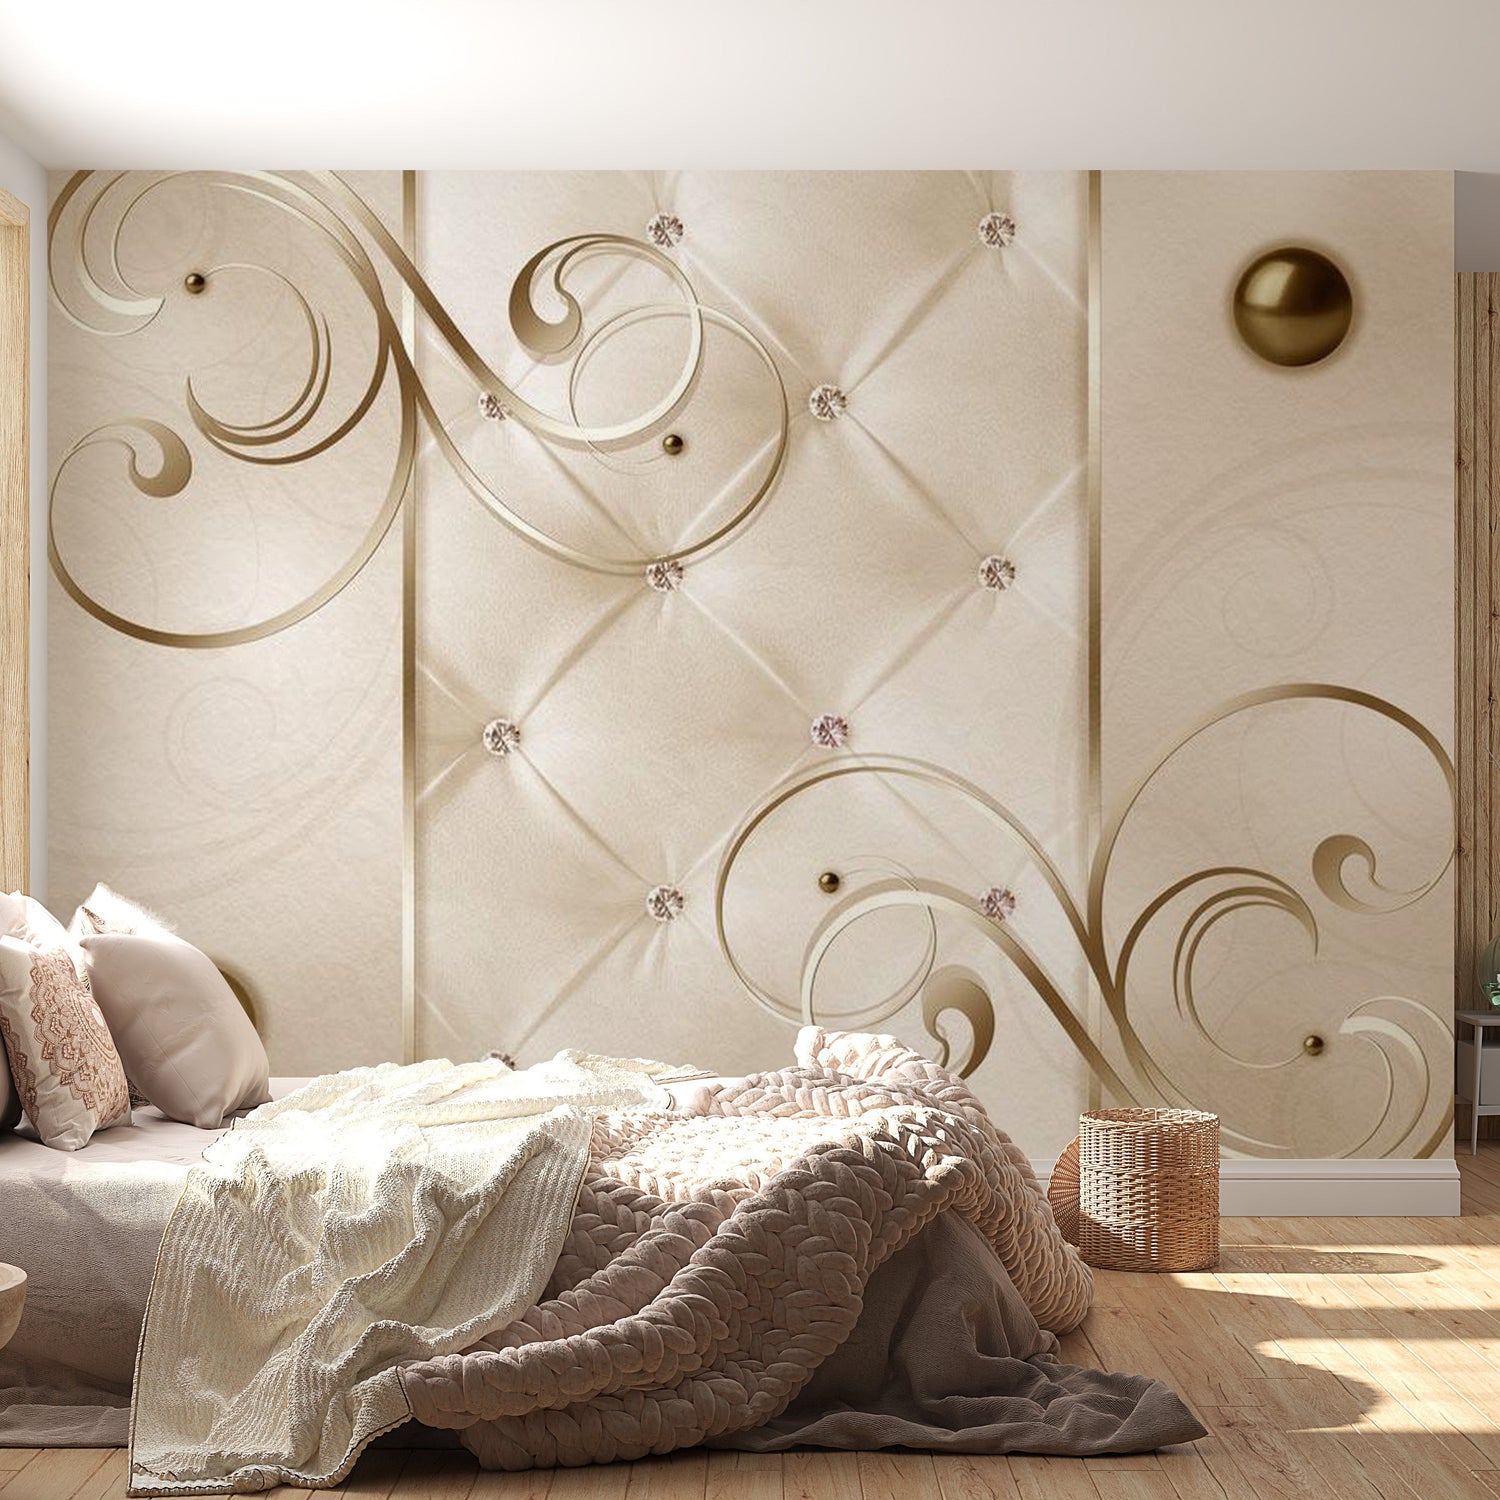 Peel & Stick Glam Wall Mural - Elegant Accent - Removable Wall Decals